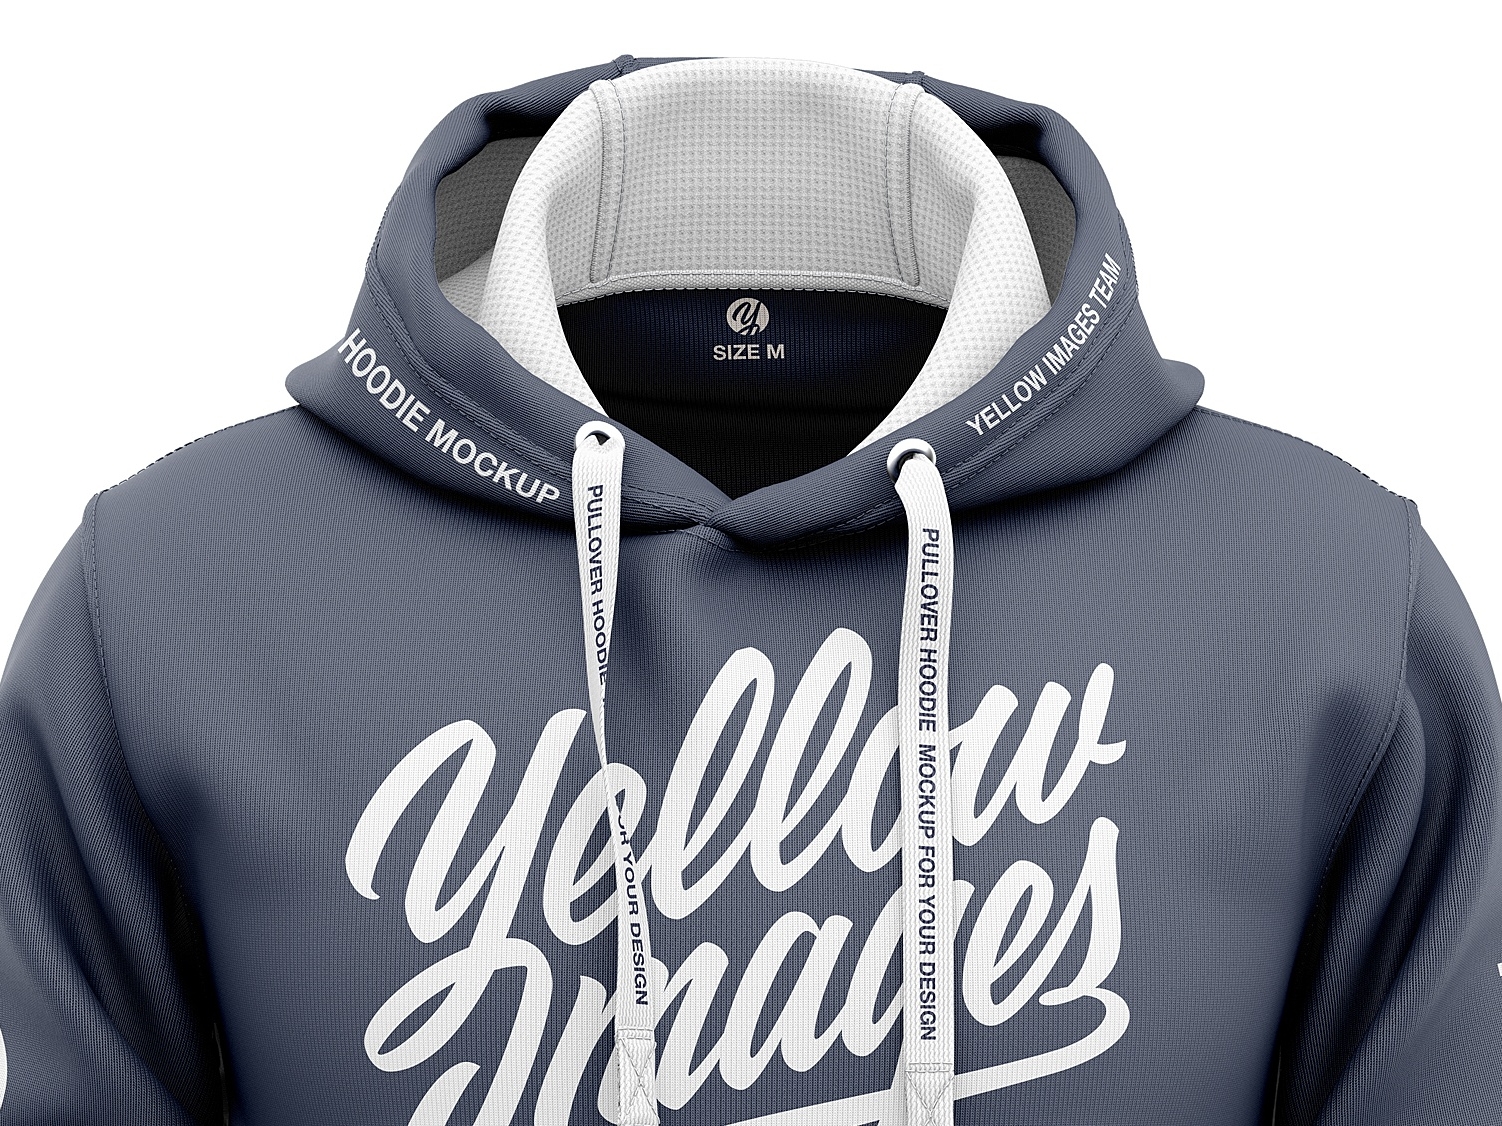 Download Hoodie Mockup by CG Tailor on Dribbble